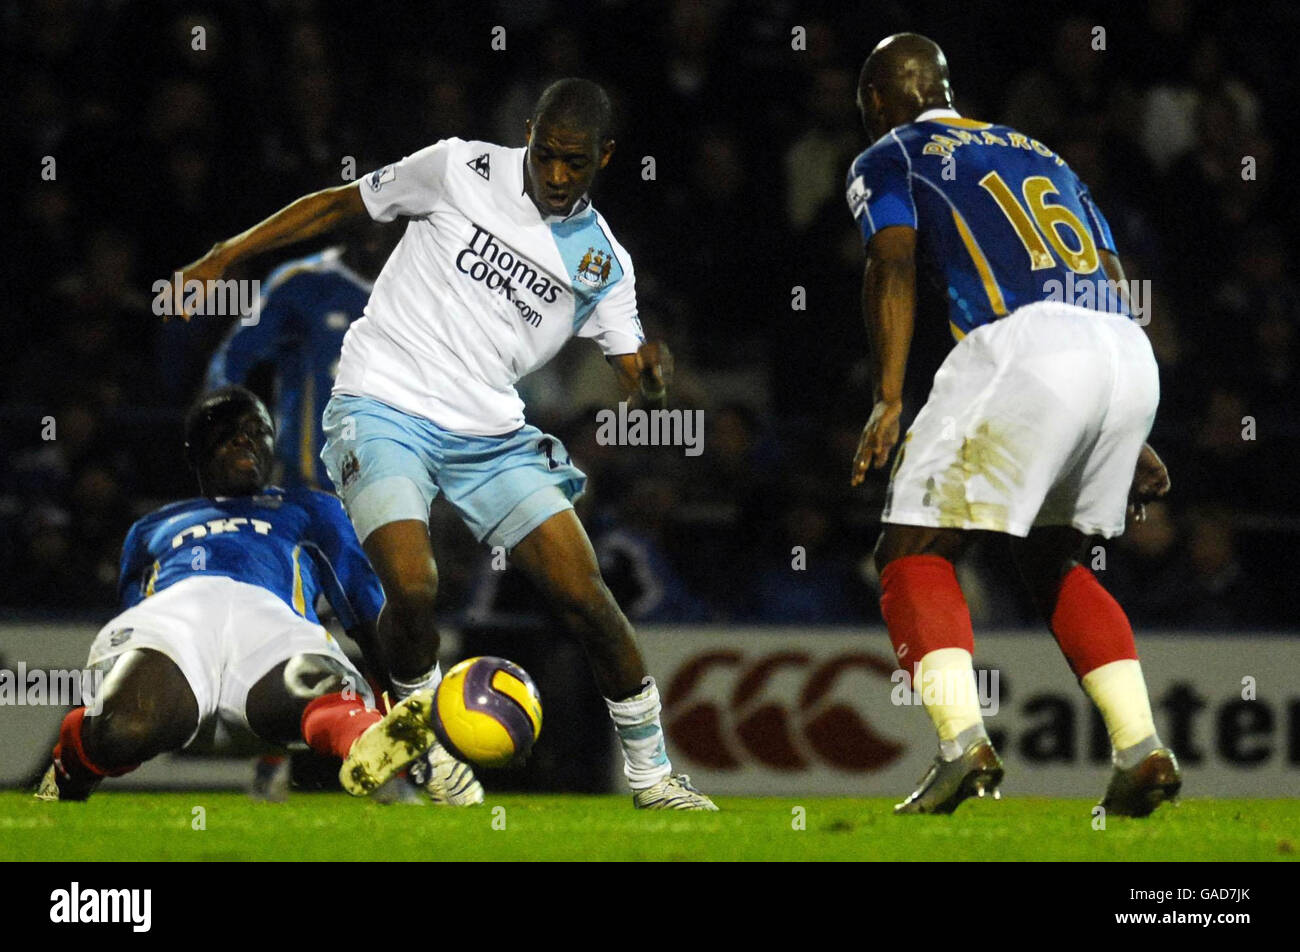 Manchester City's Gelson Fernandes in action during the Barclays Premier League match at Fratton Park, Portsmouth. Stock Photo